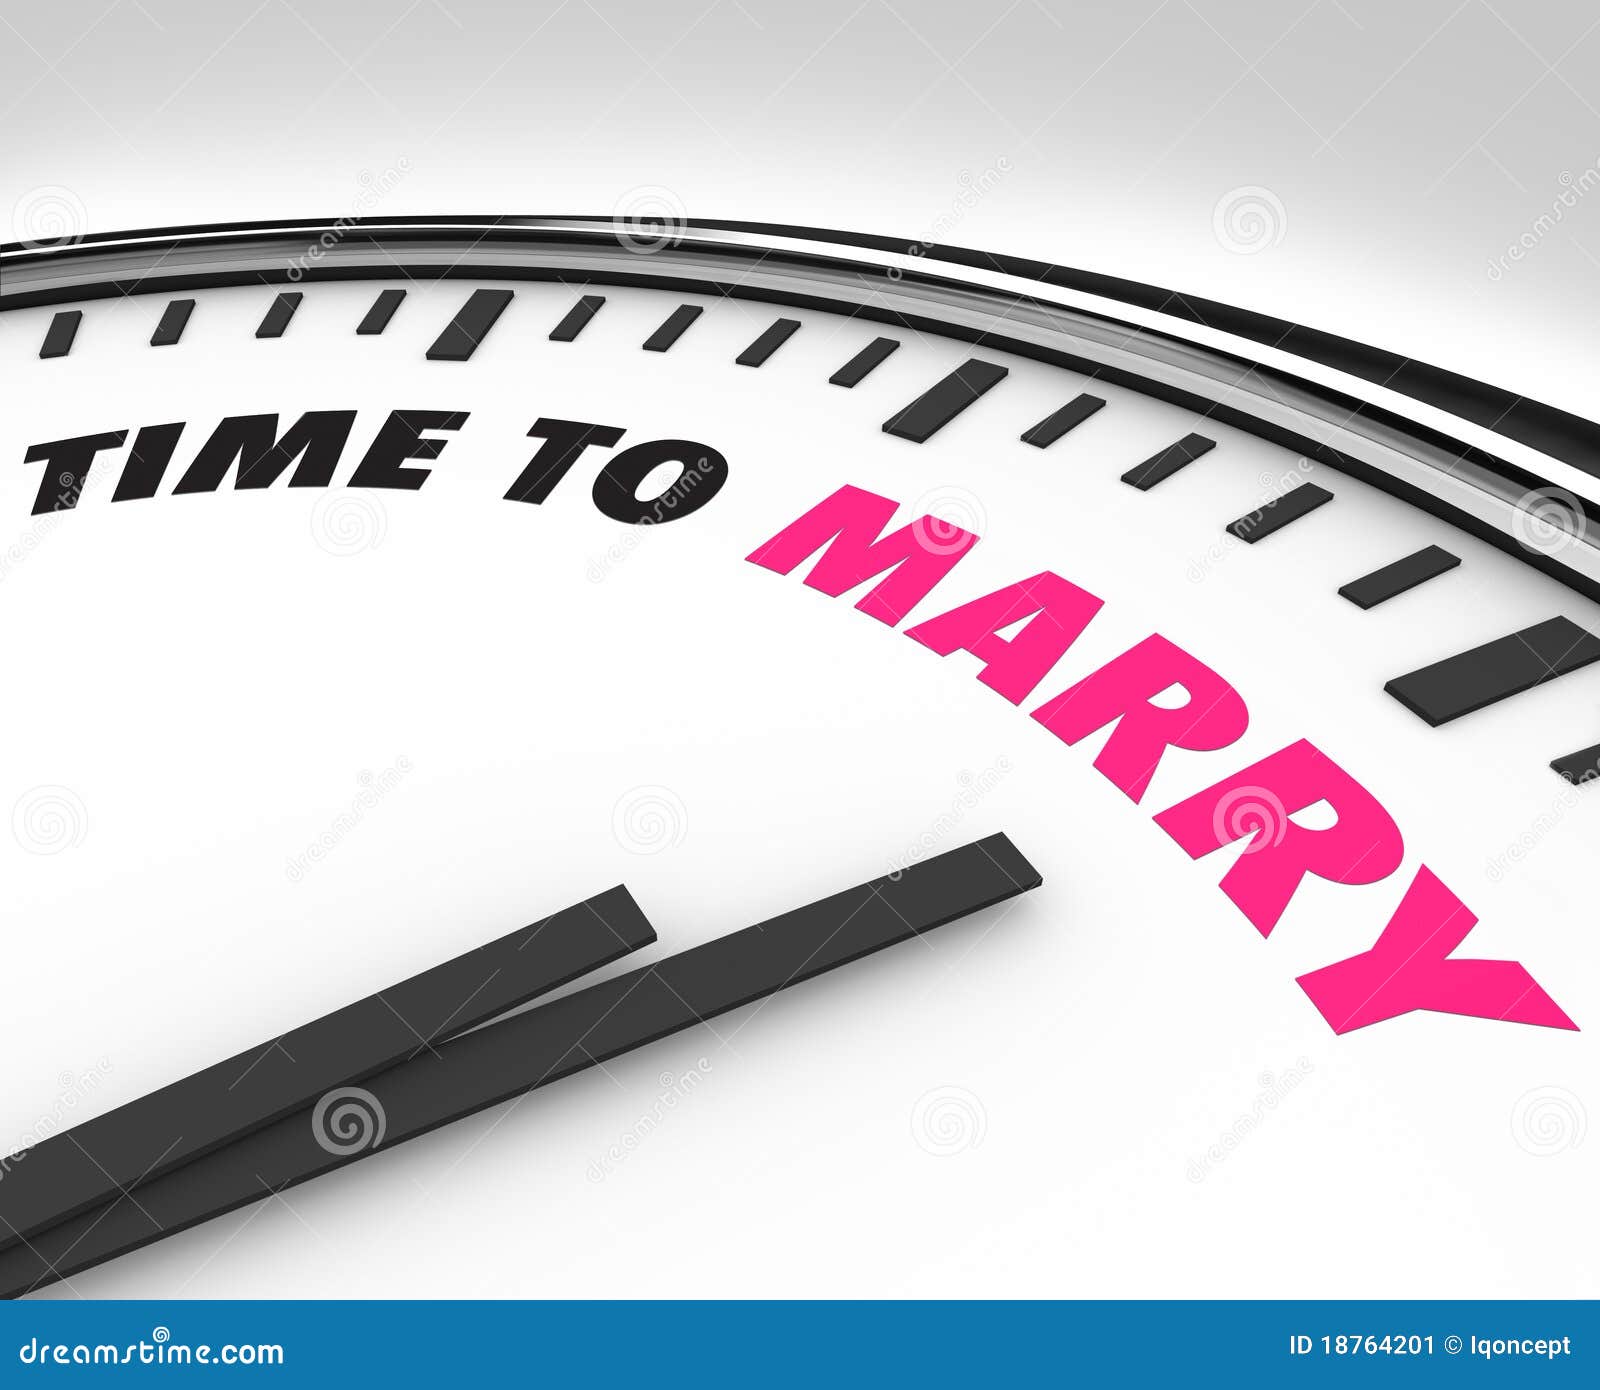 time to marry - clock for wedding ceremony